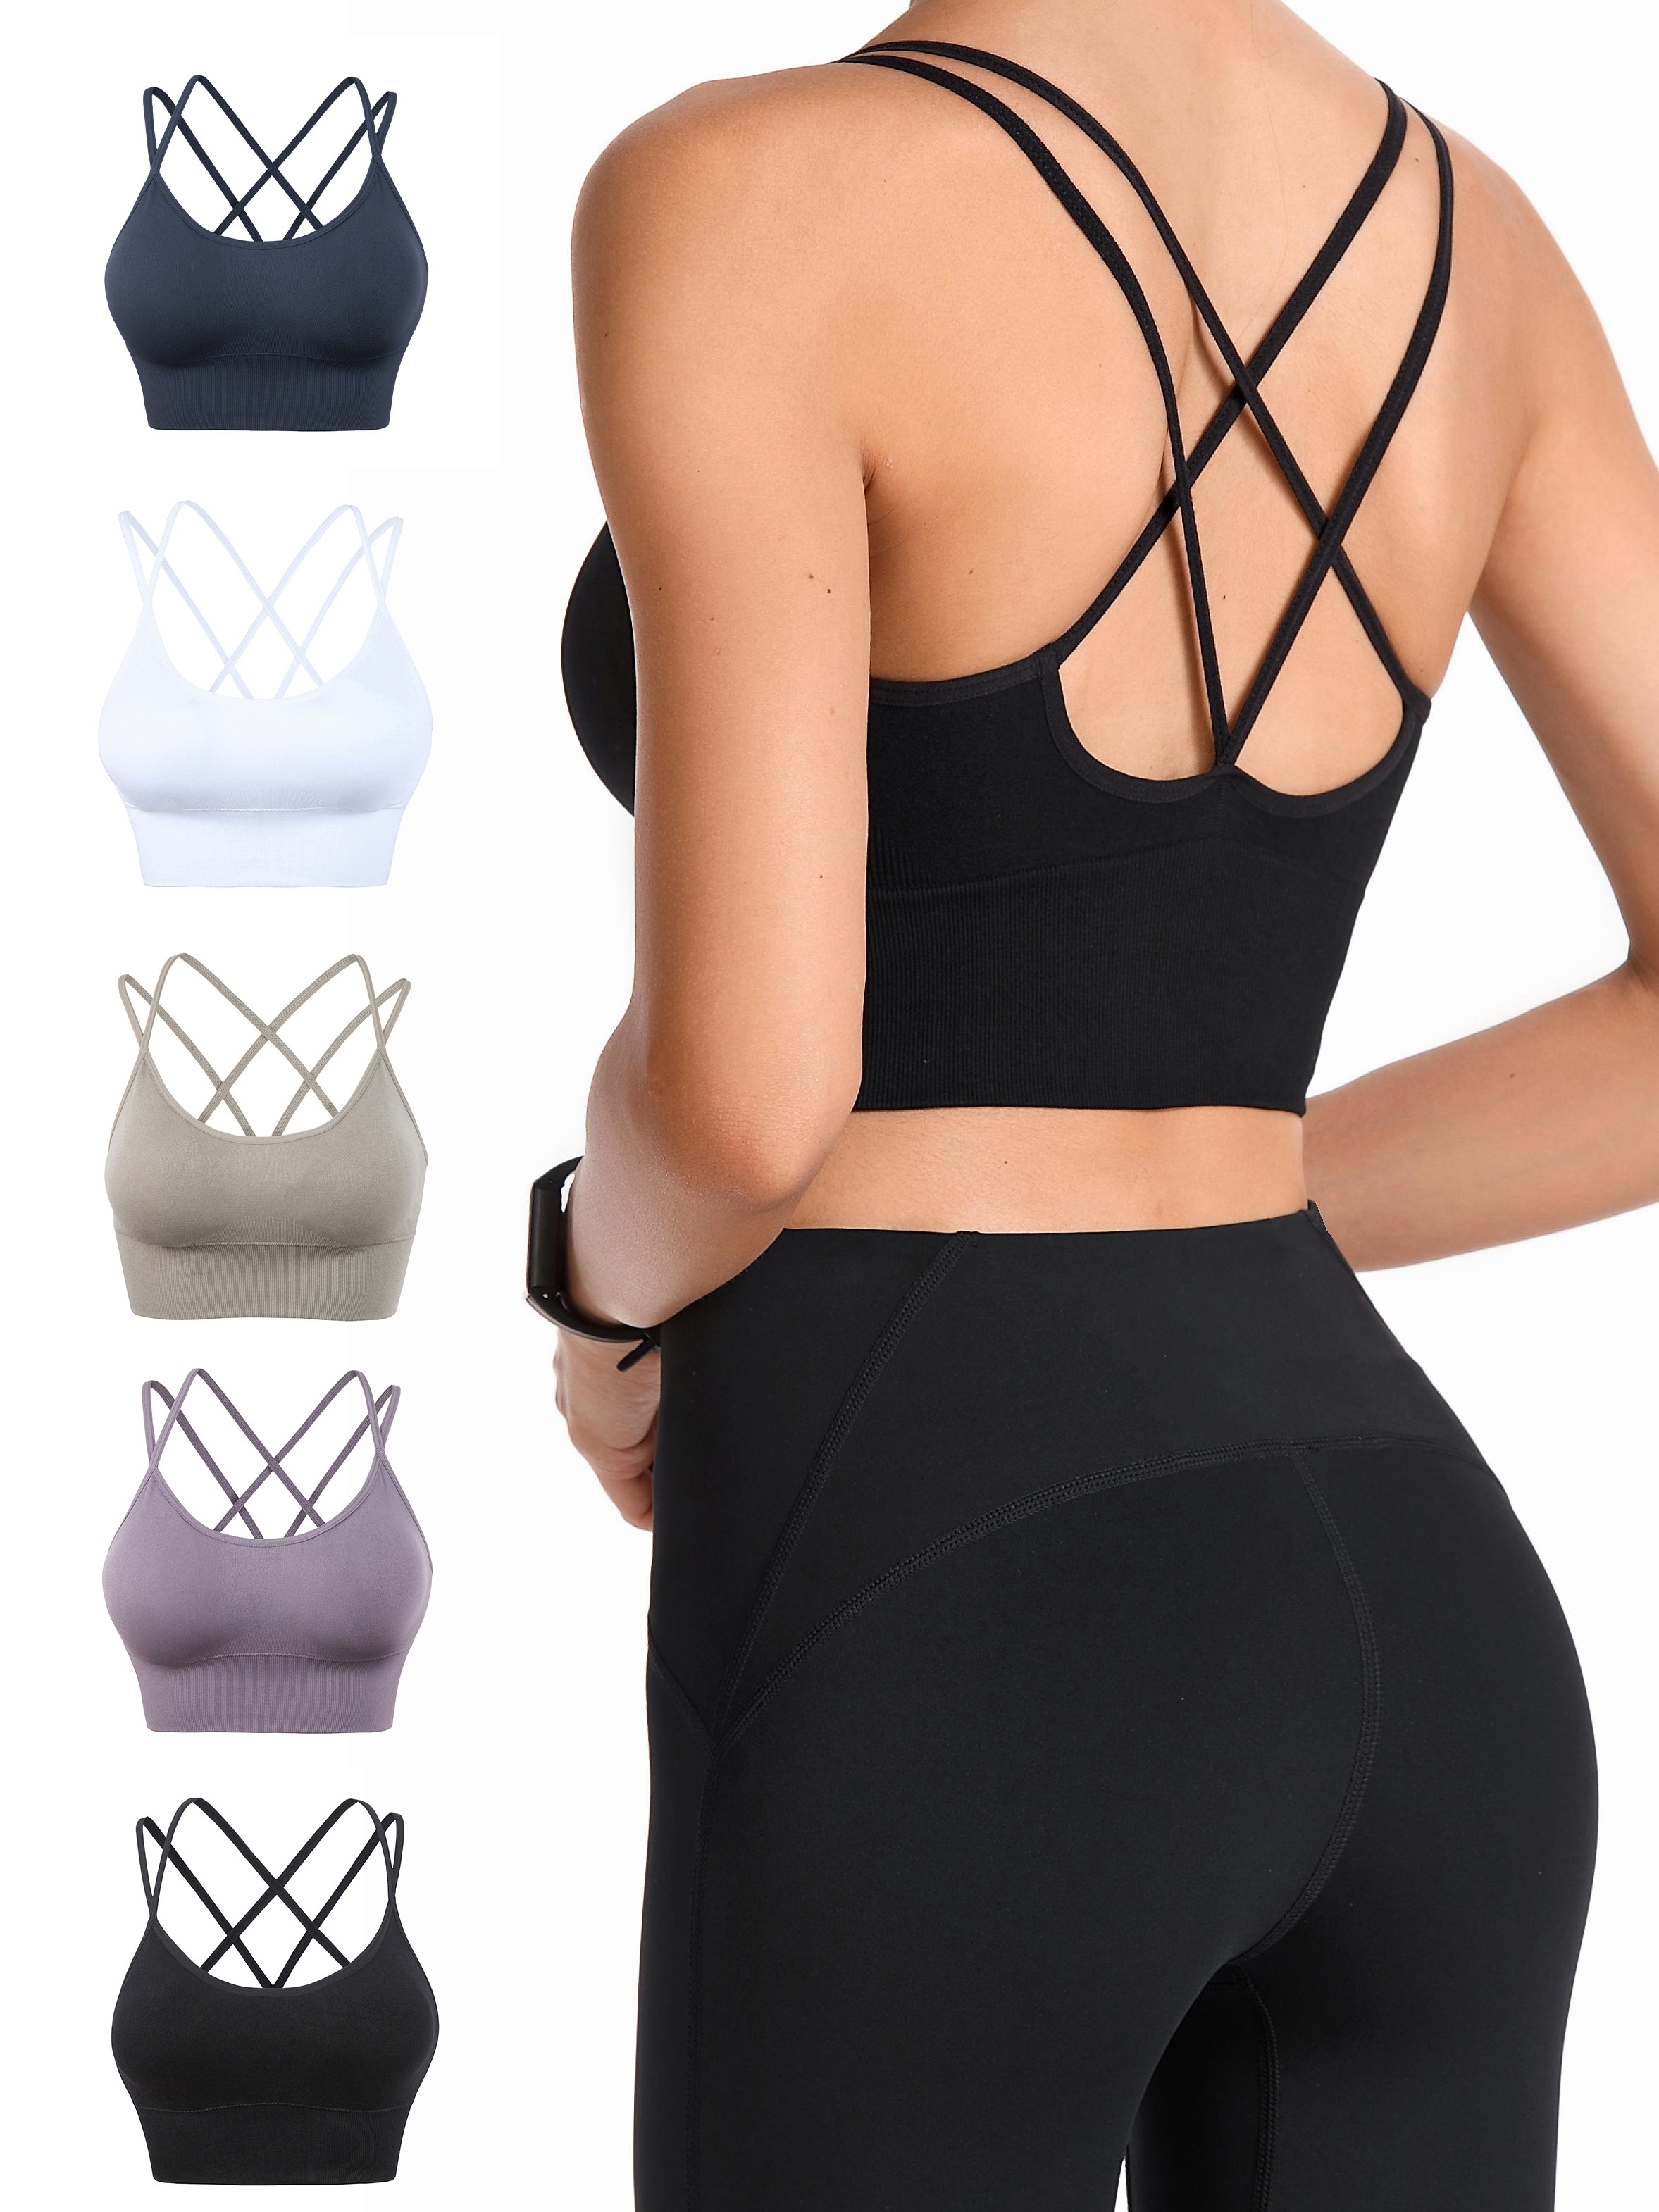 Gotoly Longline Sports Bra Criss Cross Top for Womens Zip Front Workout Crop  top Padded Tank top Strappy Wireless Bra (Black Large) 